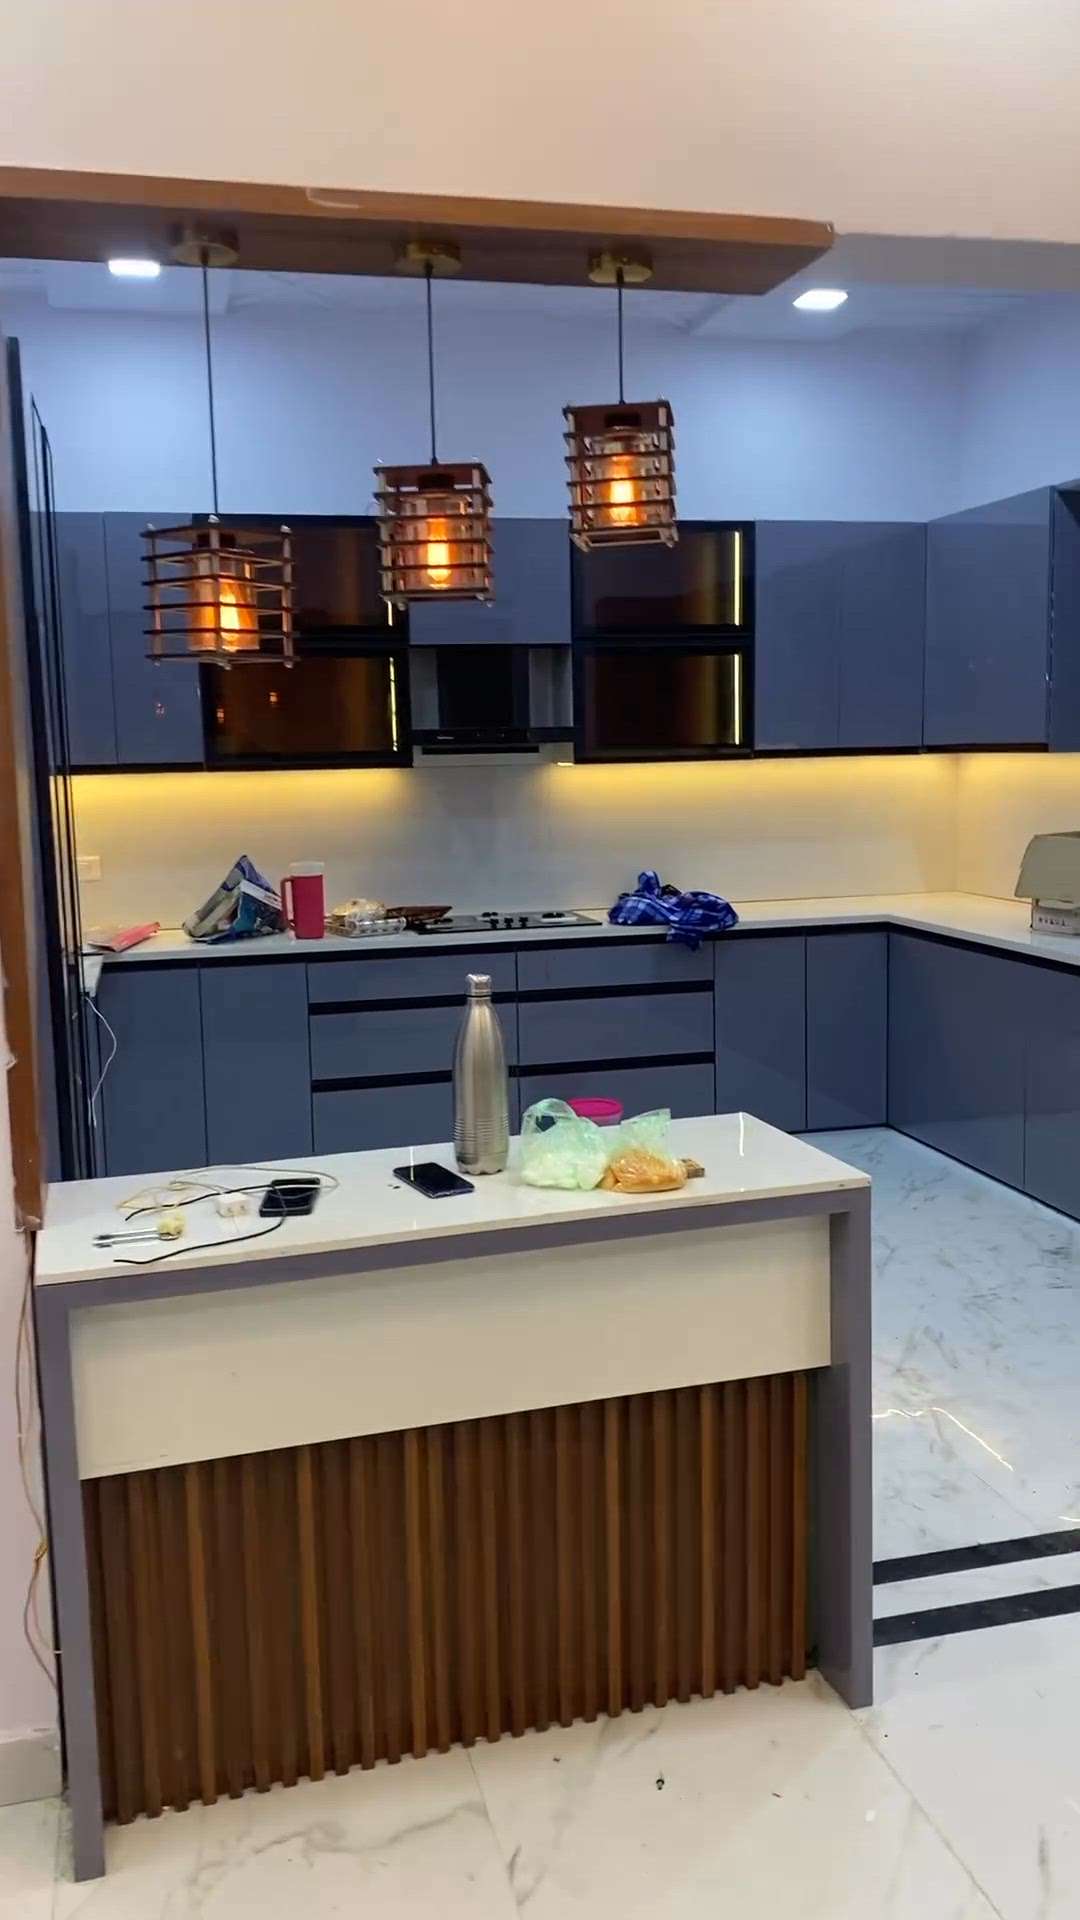 (please visit my profile) 
Looking for one-stop interior design solutions for your dream home or office? 😍
At Stunning decor, we don't just build homes but craft your desires into fresh designs to make you fall in love with your home! ✨
Get your dream home designed by us 💫furniture
📩 Comment or DM ' smart ' to order
📞Contact - 
💻 https://stunningdecor.com
Follow 👉@stunningdecor
Follow👉 @stunningdecor
Follow👉 @stunninhdecor
➖➖➖➖➖➖➖➖
#interiordesign #designinterior #interiordesigner #designdeinteriores #interiordesignideas #interiordesigners #designerdeinteriores #interiordesigns #interiordesigninspiration
.
.
.
#memeindian
#memesociety
#indianjoke
#desitrolls
#idioticsperm
#interiordesign #designinterior #interiordesigner #designdeinteriores #interiordesignideas #interiordesigners #designerdeinteriores #interiordesigns #interiordesigninspiration #interioresdesign #designdeinterior #interiorsdesign #designerinteriors